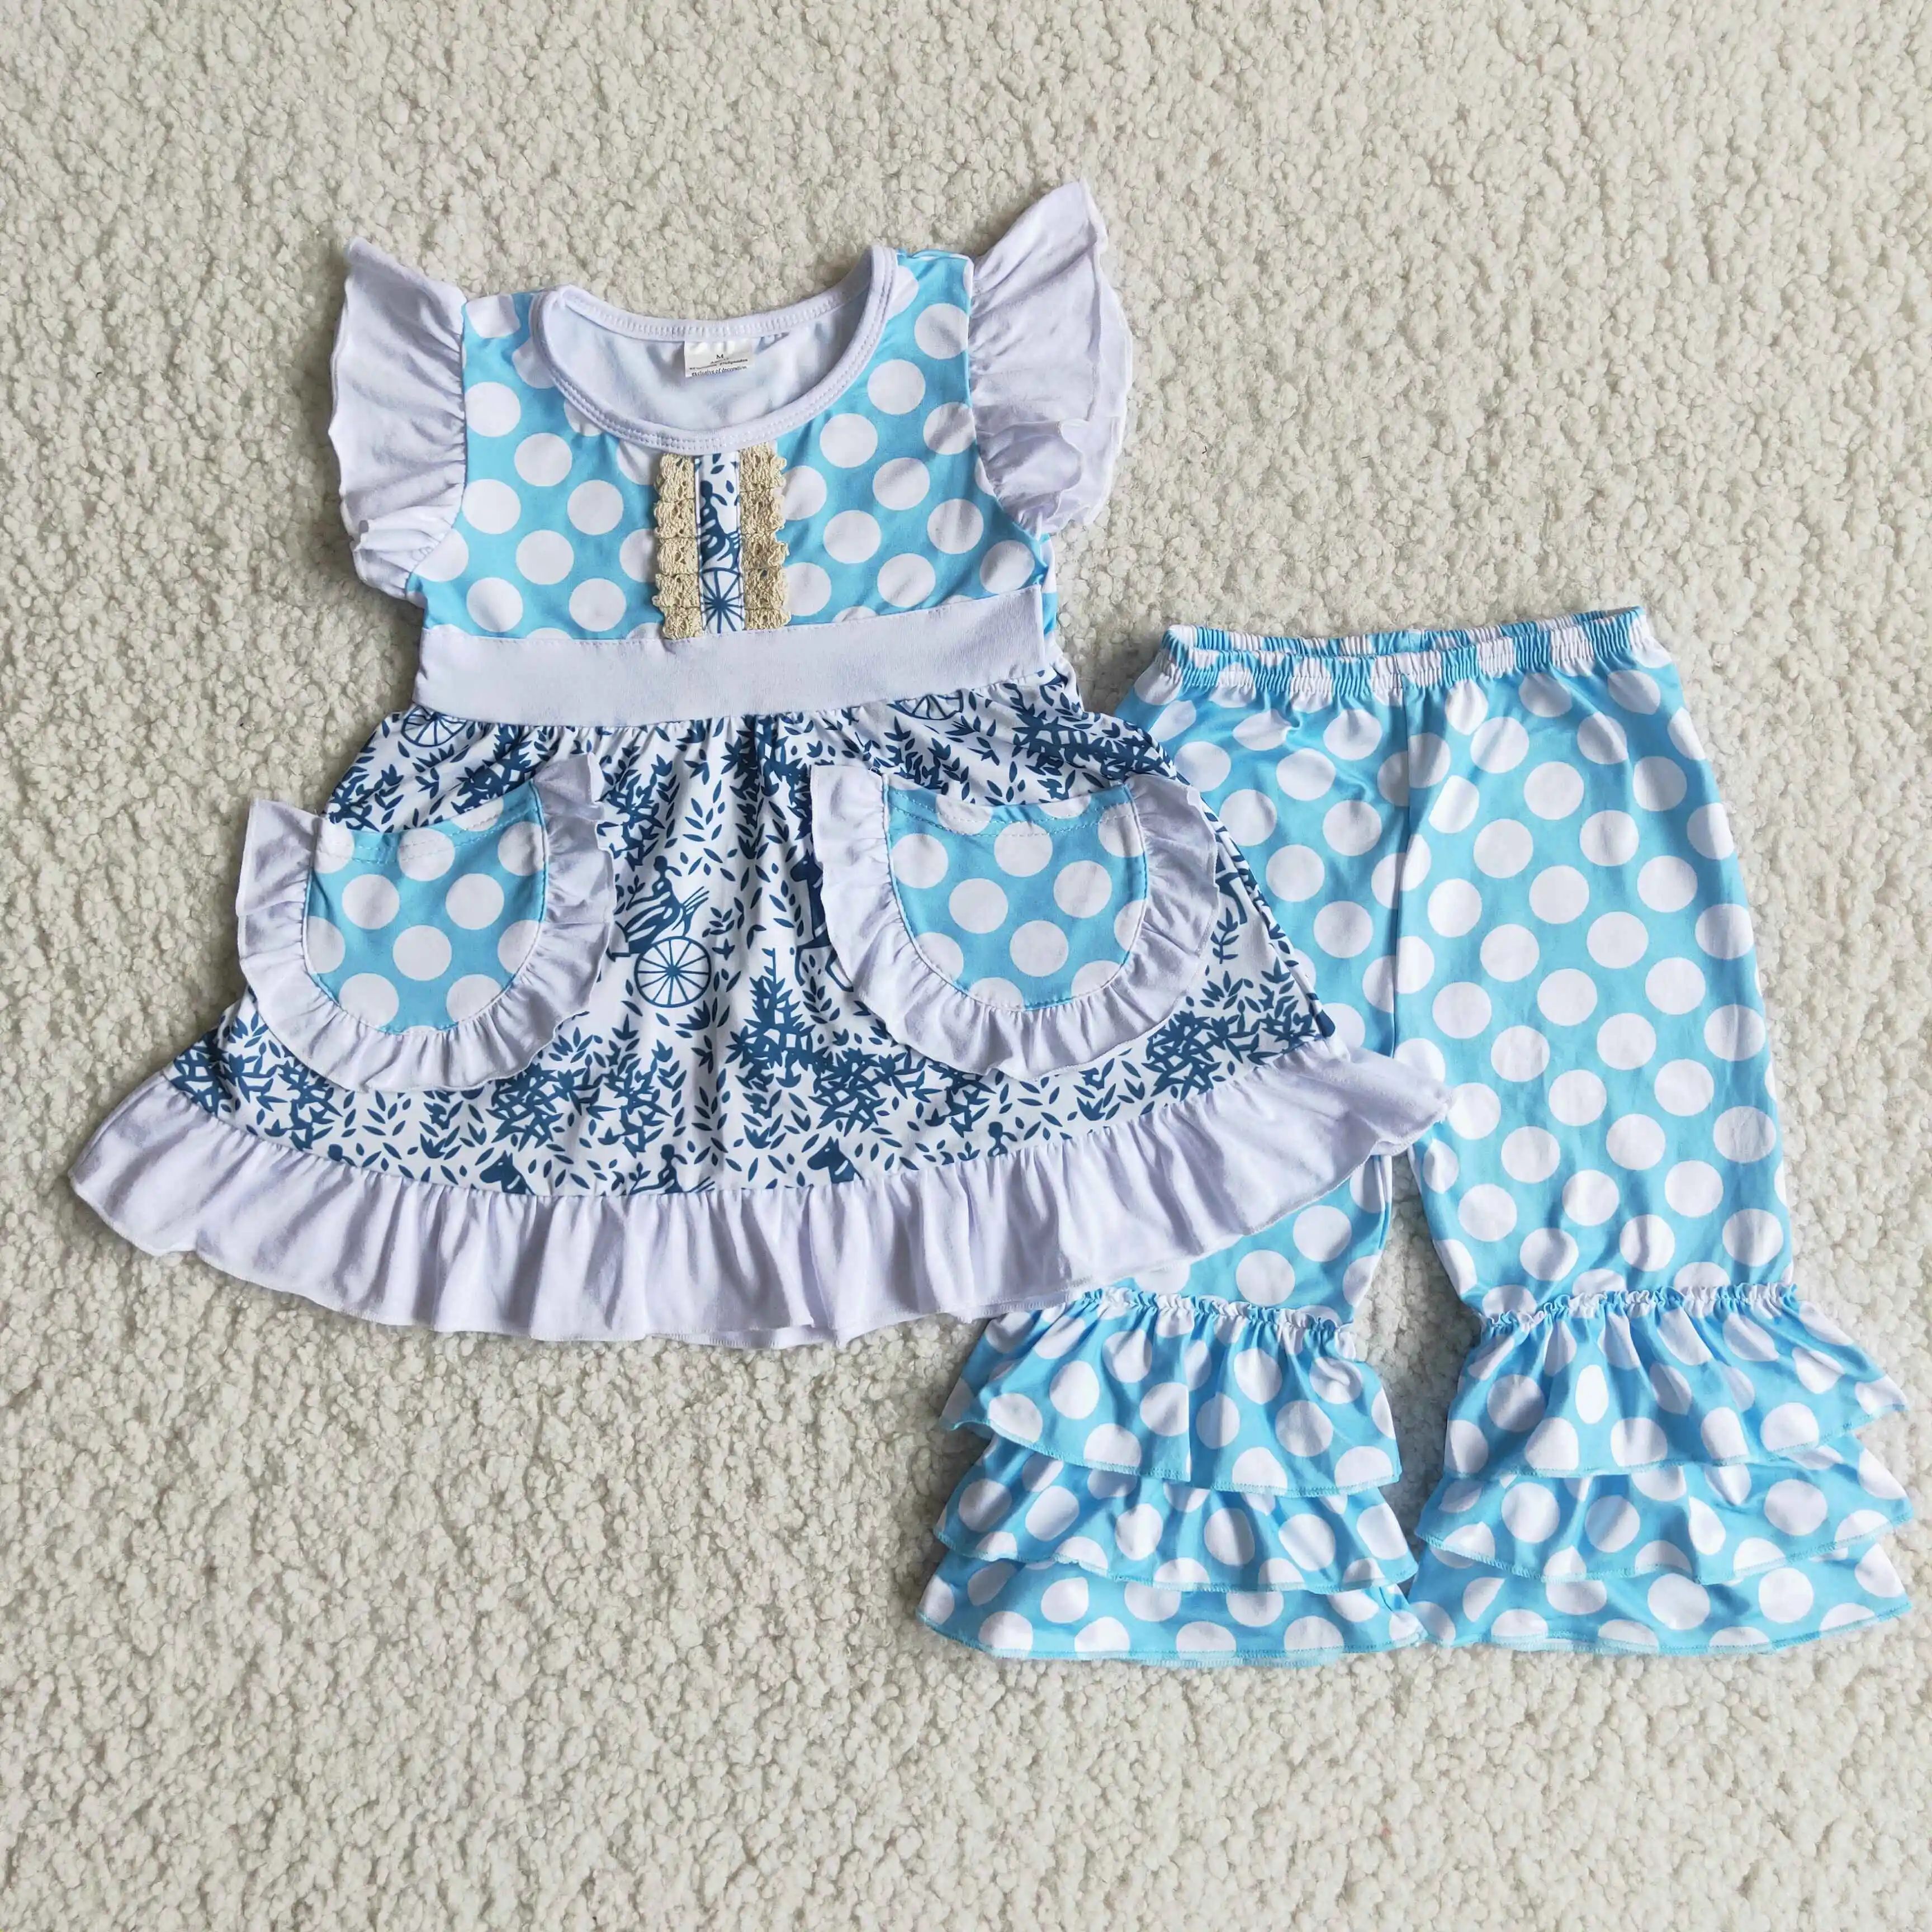 

Toddlers Sky Blue Polka Dot Outfits Baby Girls Flutter Sleeves Top Ruffled Pants Kids Clothing Sets Children Boutique Styles